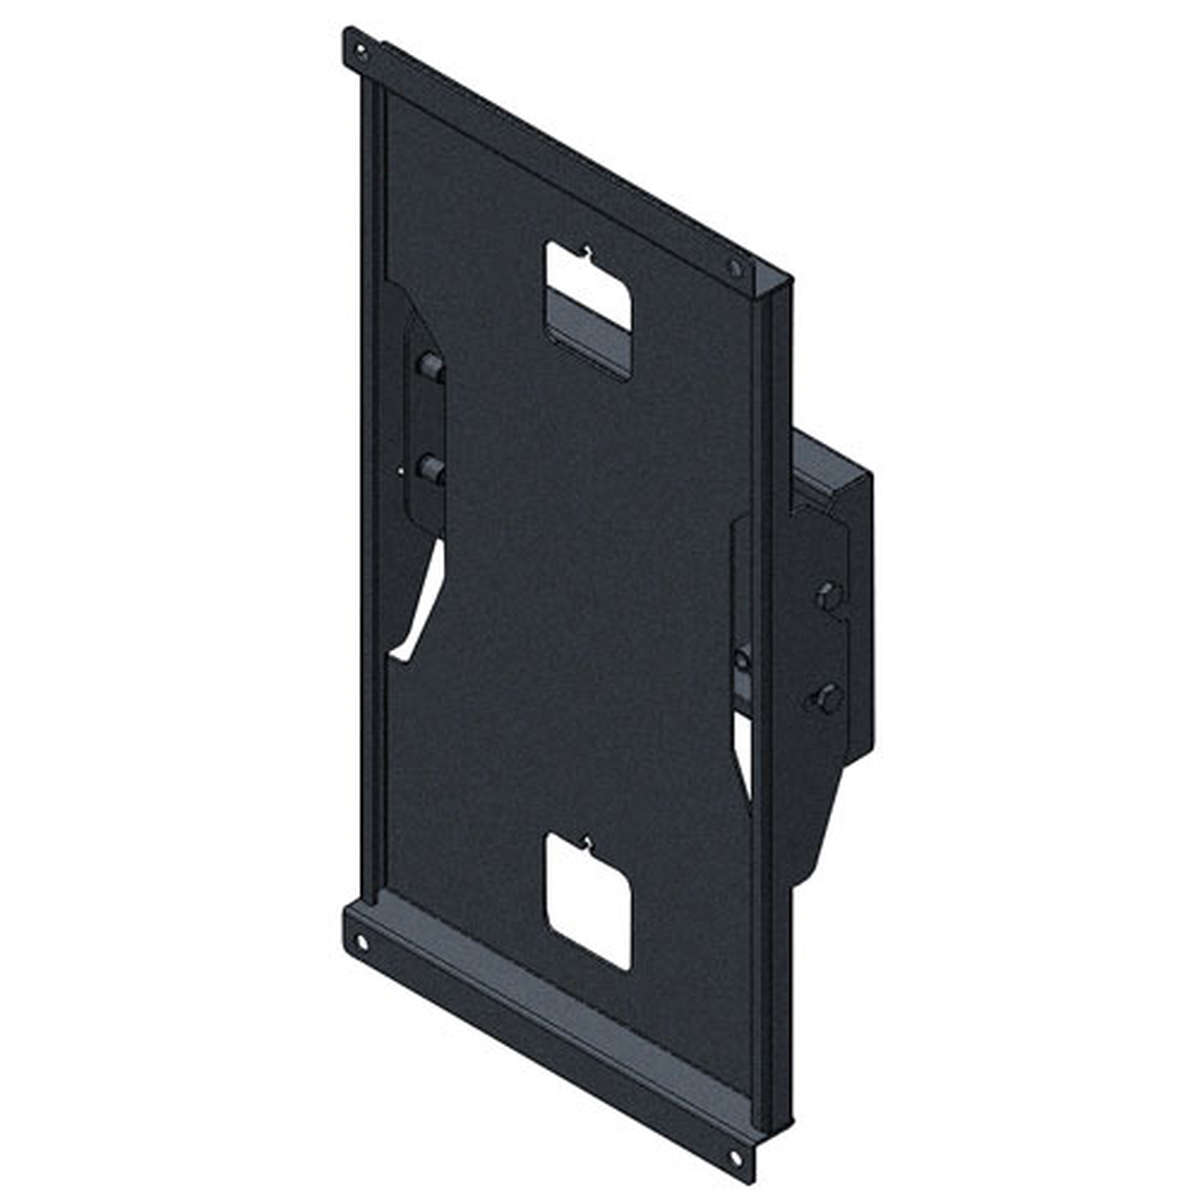 Unicol PPW1 Xactmatch Portrait bespoke tilting wall mount for monitors and TVs up to 70 inches product image